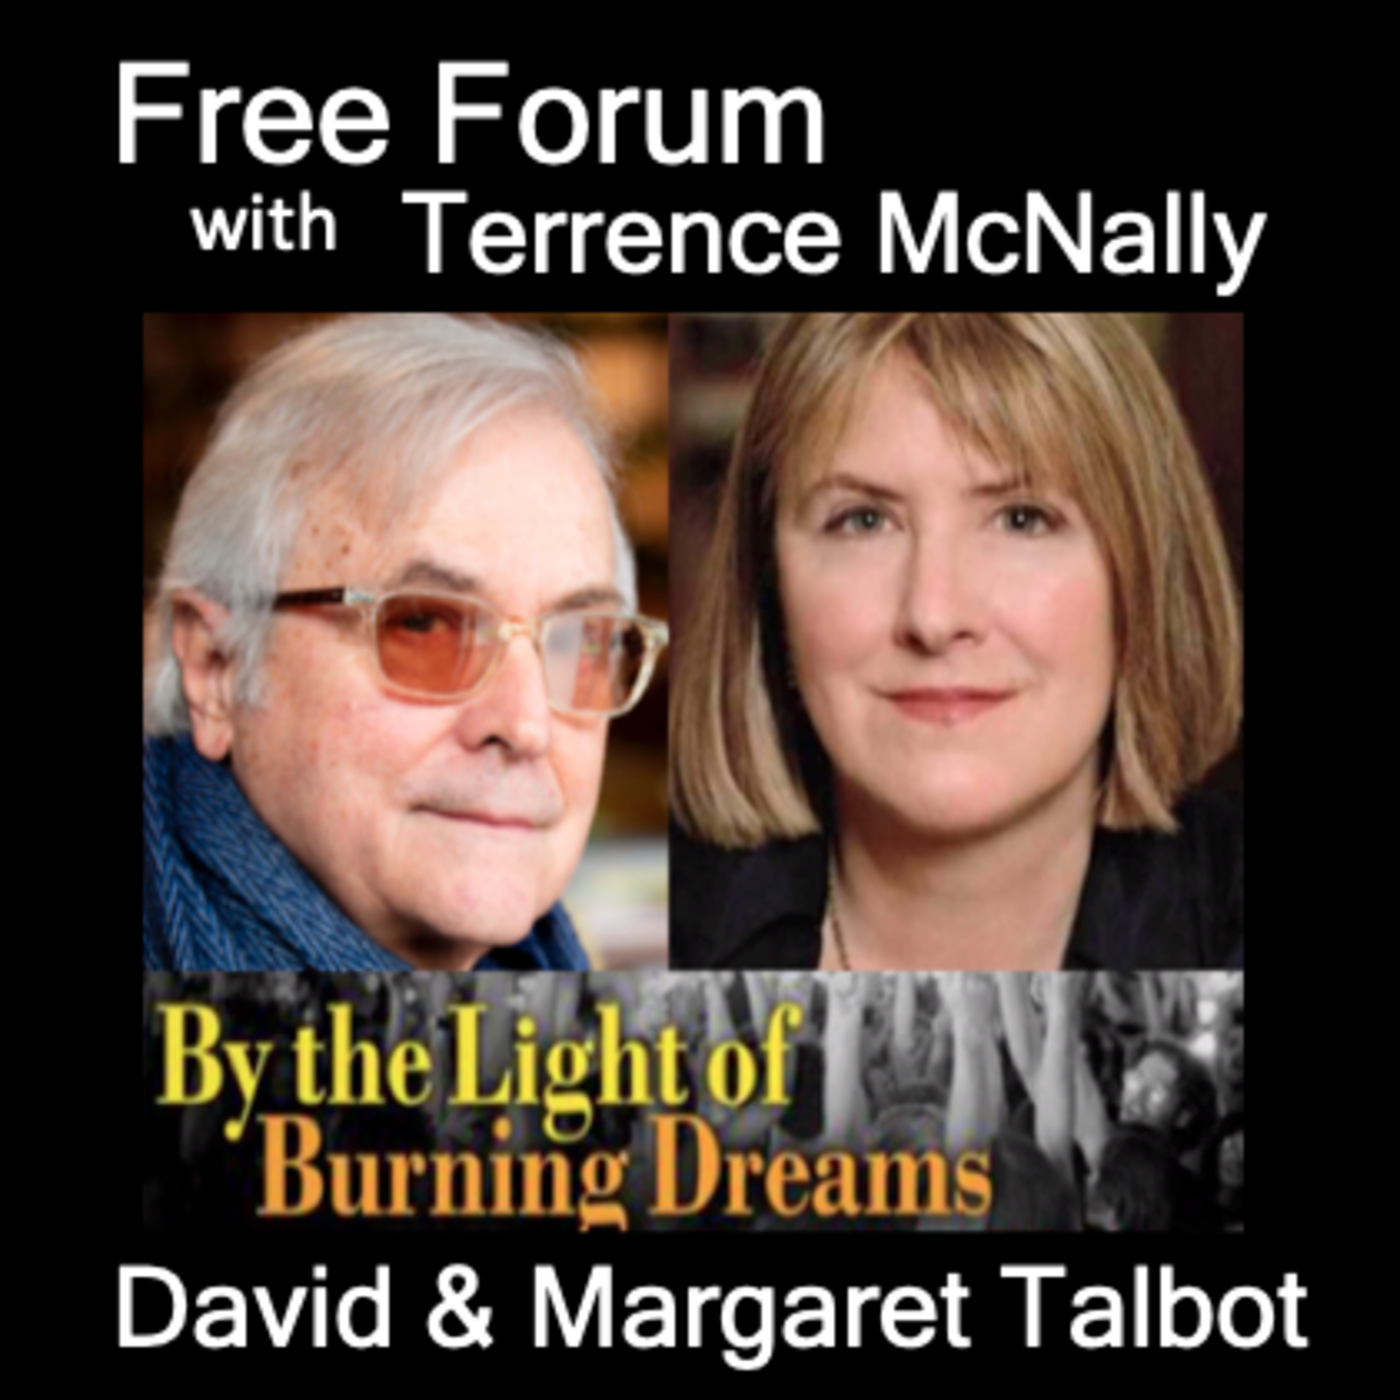 Episode 542: Triumphs & Tragedies of the 60’s Revolution - DAVID & MARGARET TALBOT - BY THE LIGHT OF BURNING DREAMS